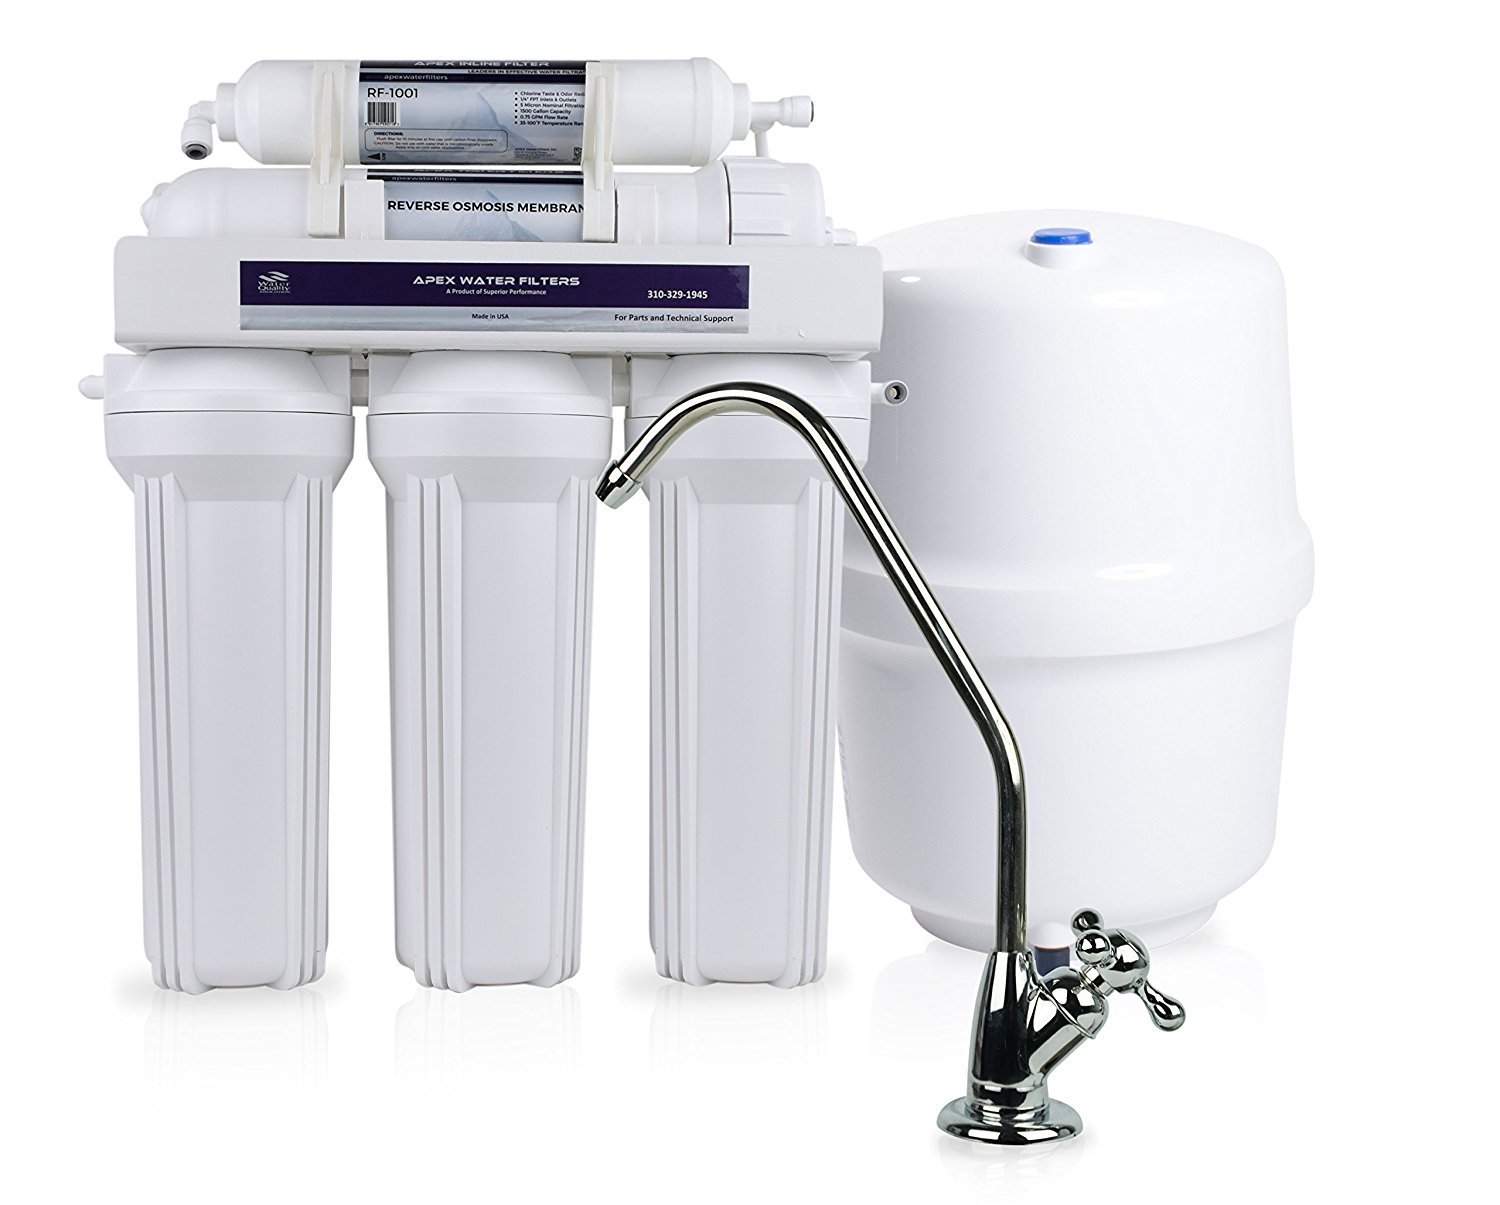 APEX MR-5100 5 Stage Reverse Osmosis Drinking Water System - Made in U.S.A.